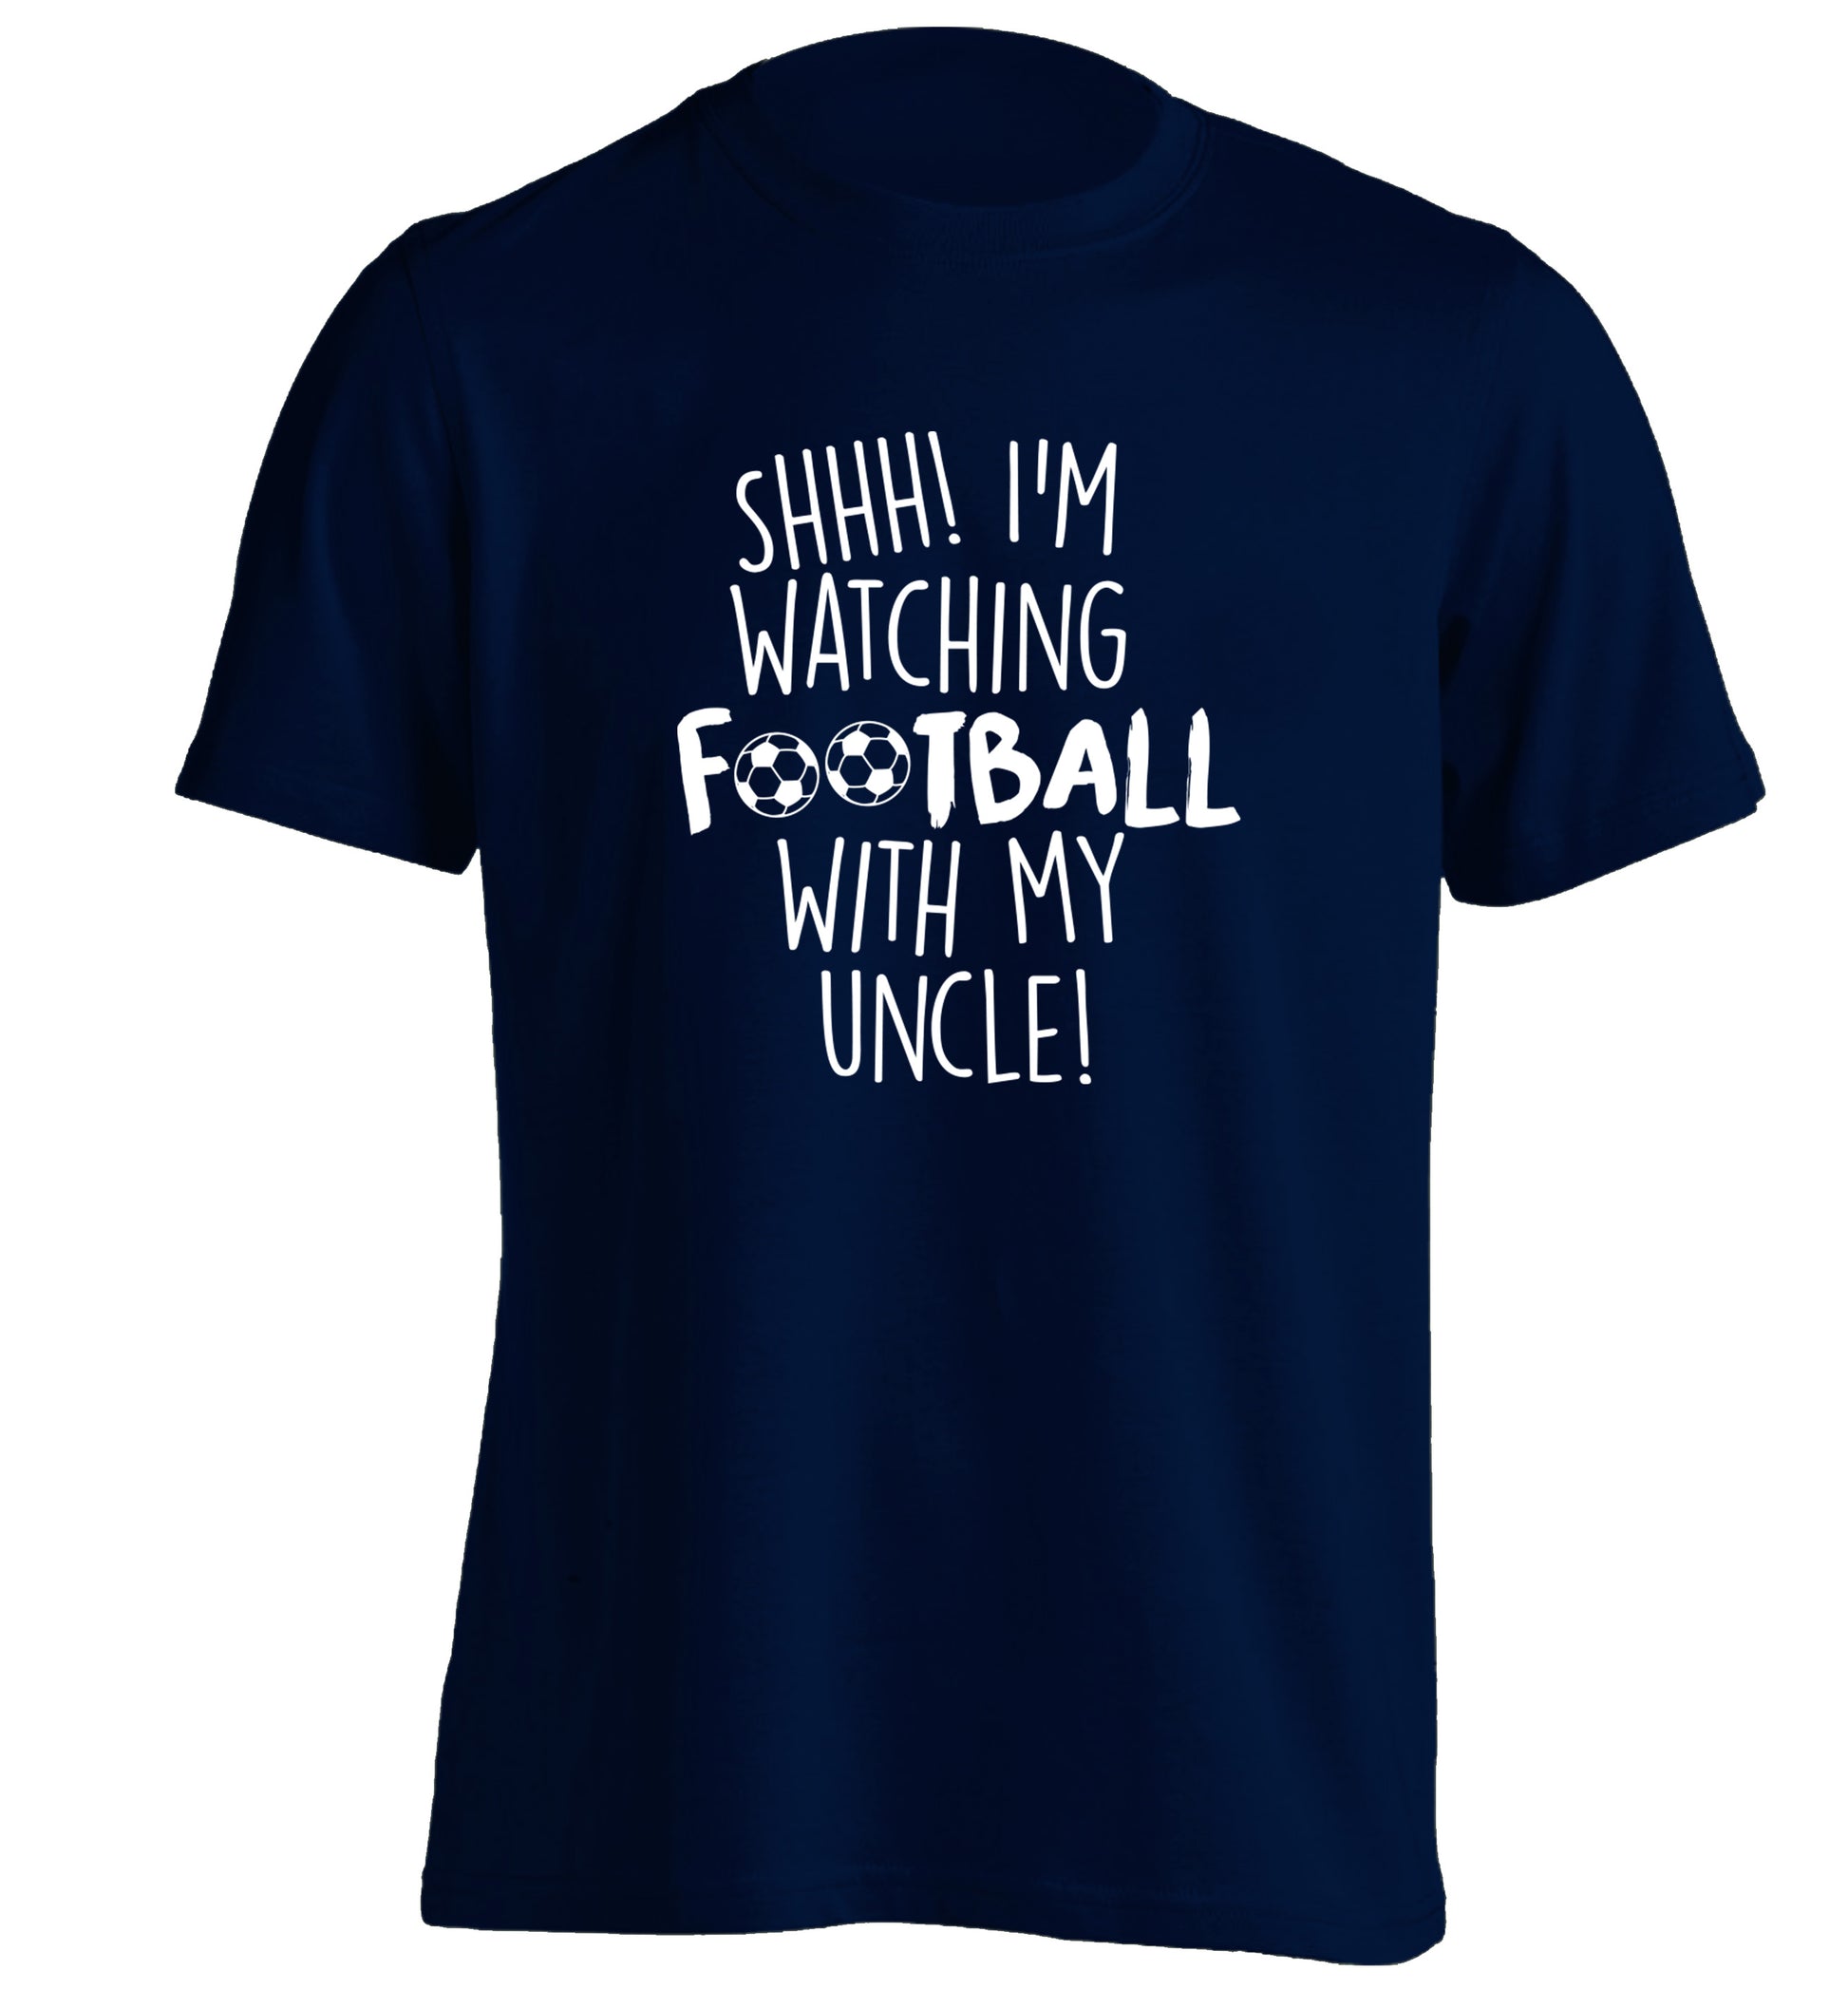 Shhh I'm watching football with my uncle adults unisexnavy Tshirt 2XL